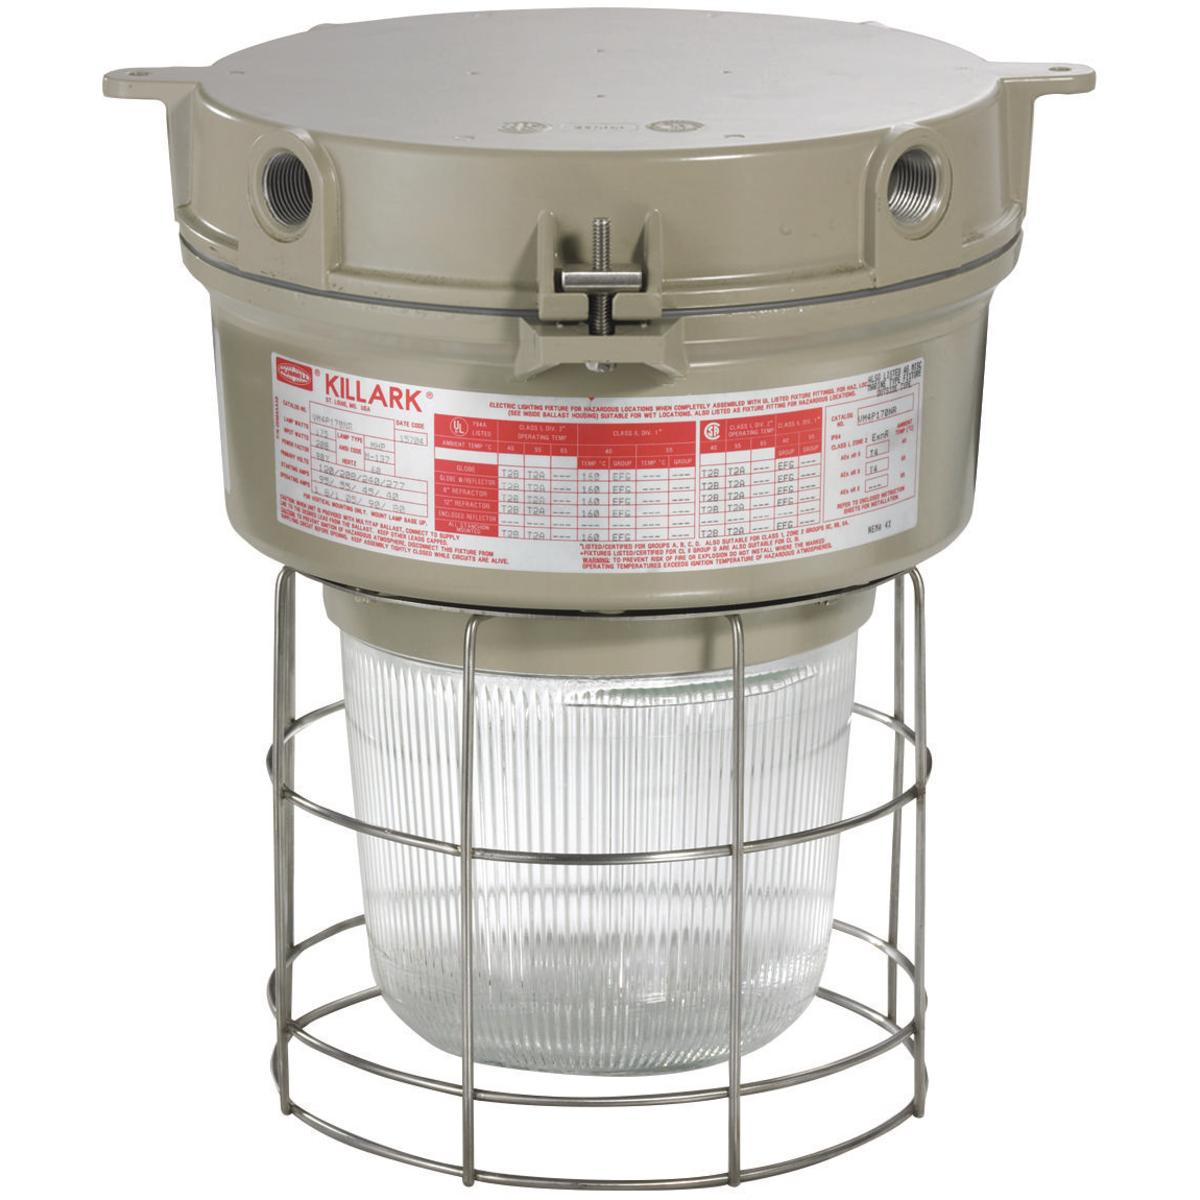 Hubbell VM4P155X2R1G VM4 Series - 150W Metal Halide 480V - 3/4" Ceiling Mount - Type I Glass Refractor and Guard  ; Ballast tank and splice box – corrosion resistant copper-free aluminum alloy with baked powder epoxy/polyester finish, electrostatically applied for complete, u